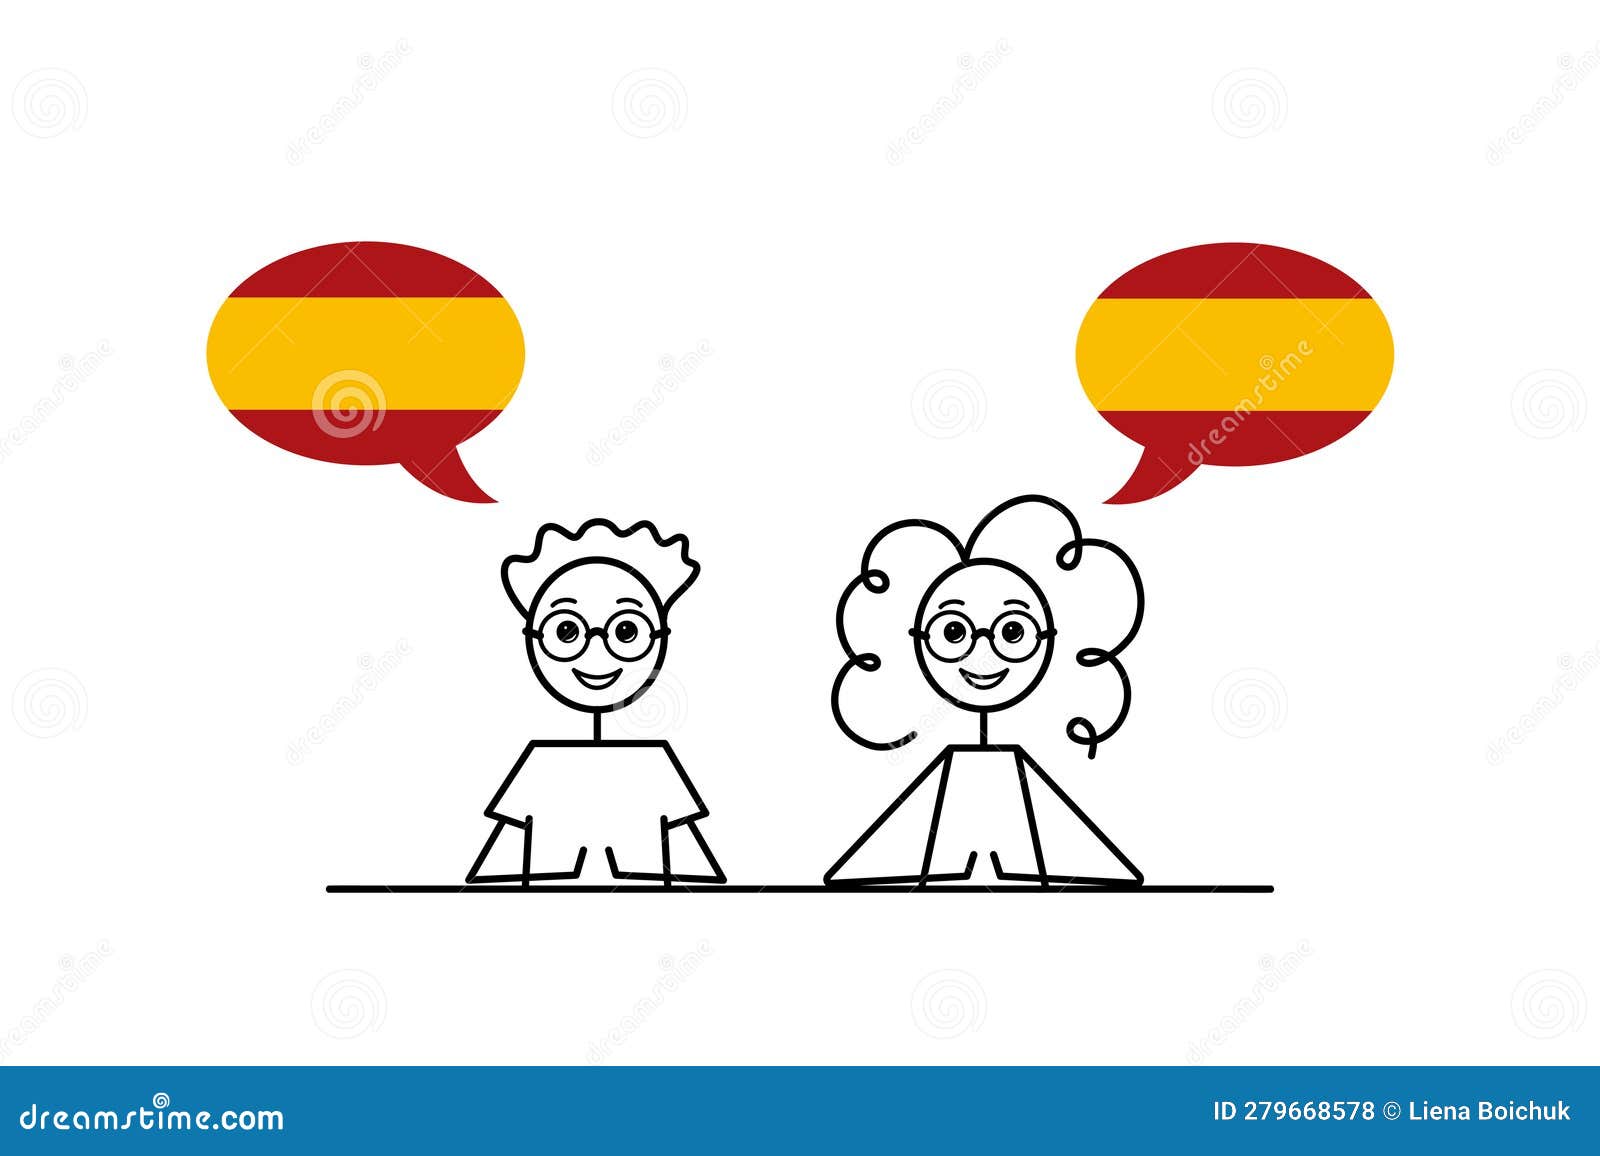 spanish speakers, cartoon boy and girl with speech bubbles in spain flag colors, learning spanish language 